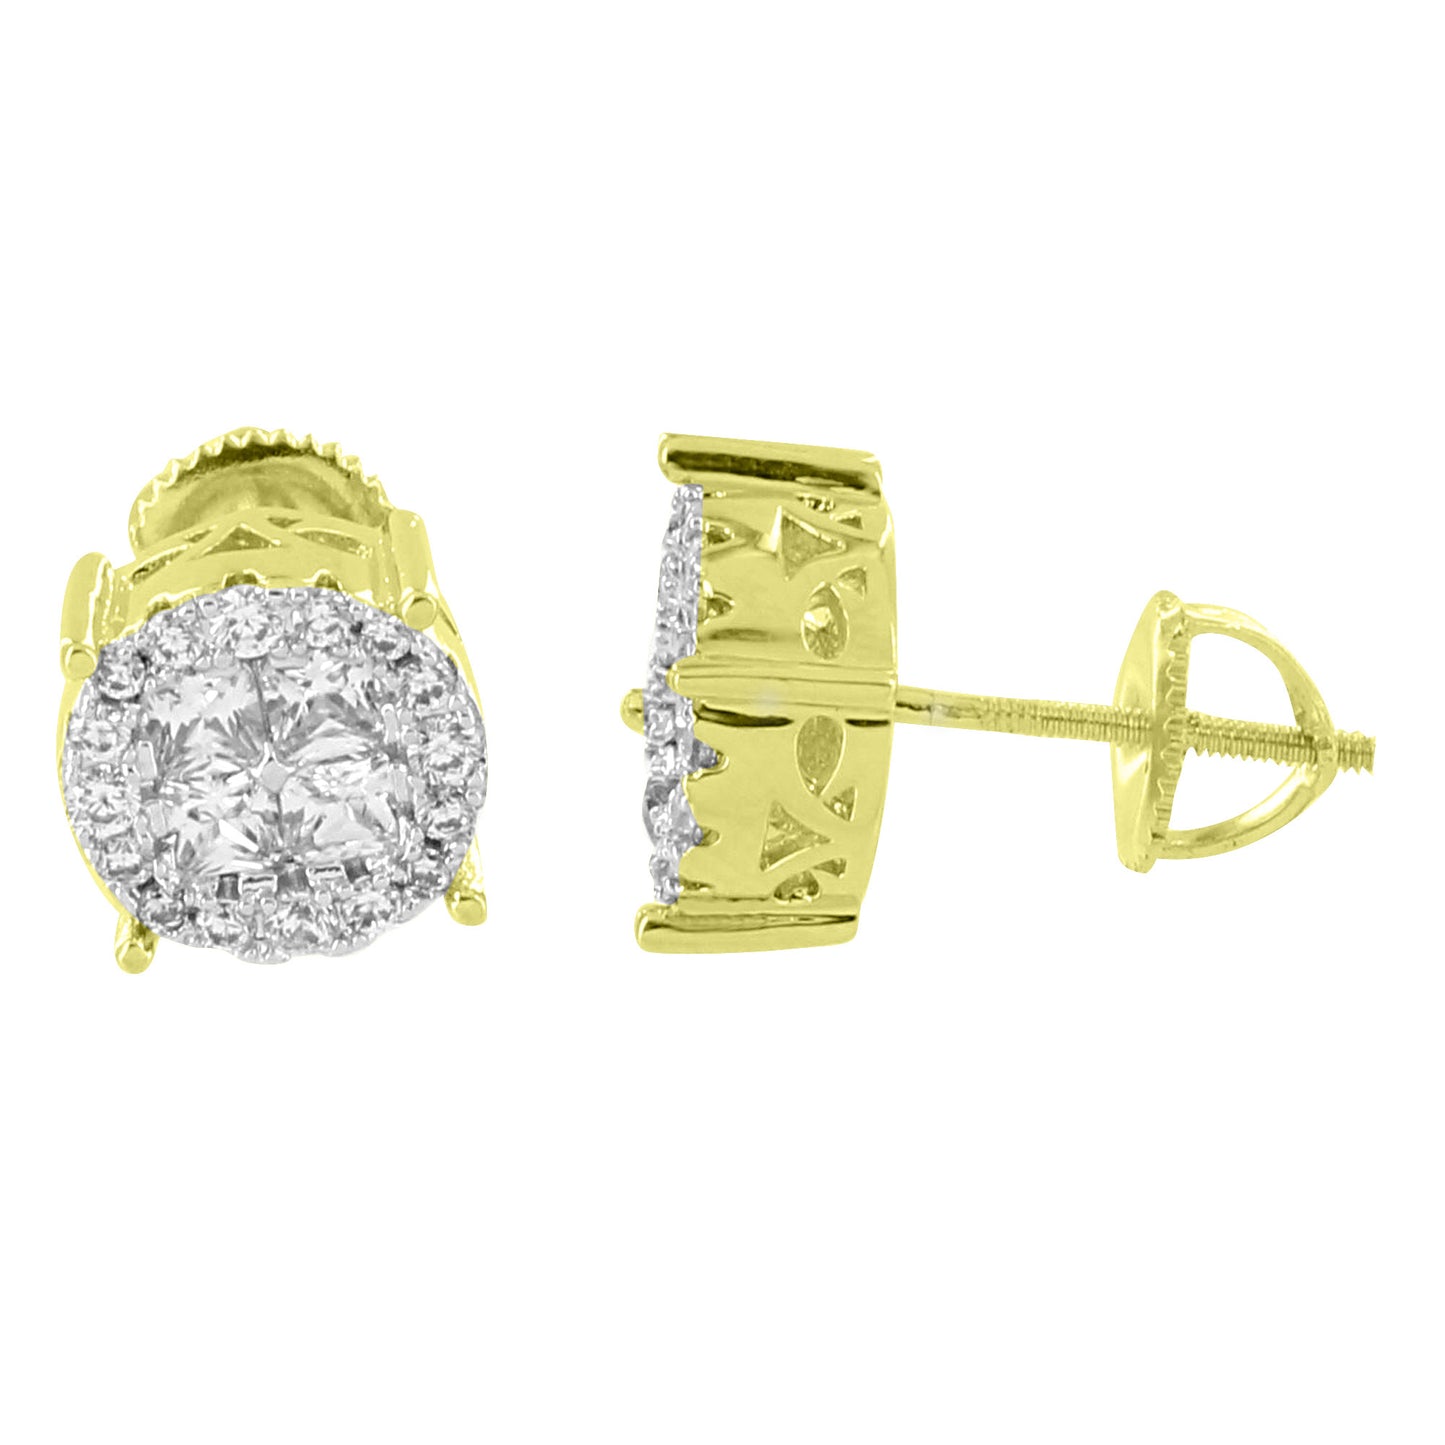 Solitaire Cluster Earrings Round Simulated Diamonds 14K Yellow Gold Finish Screw Back Studs